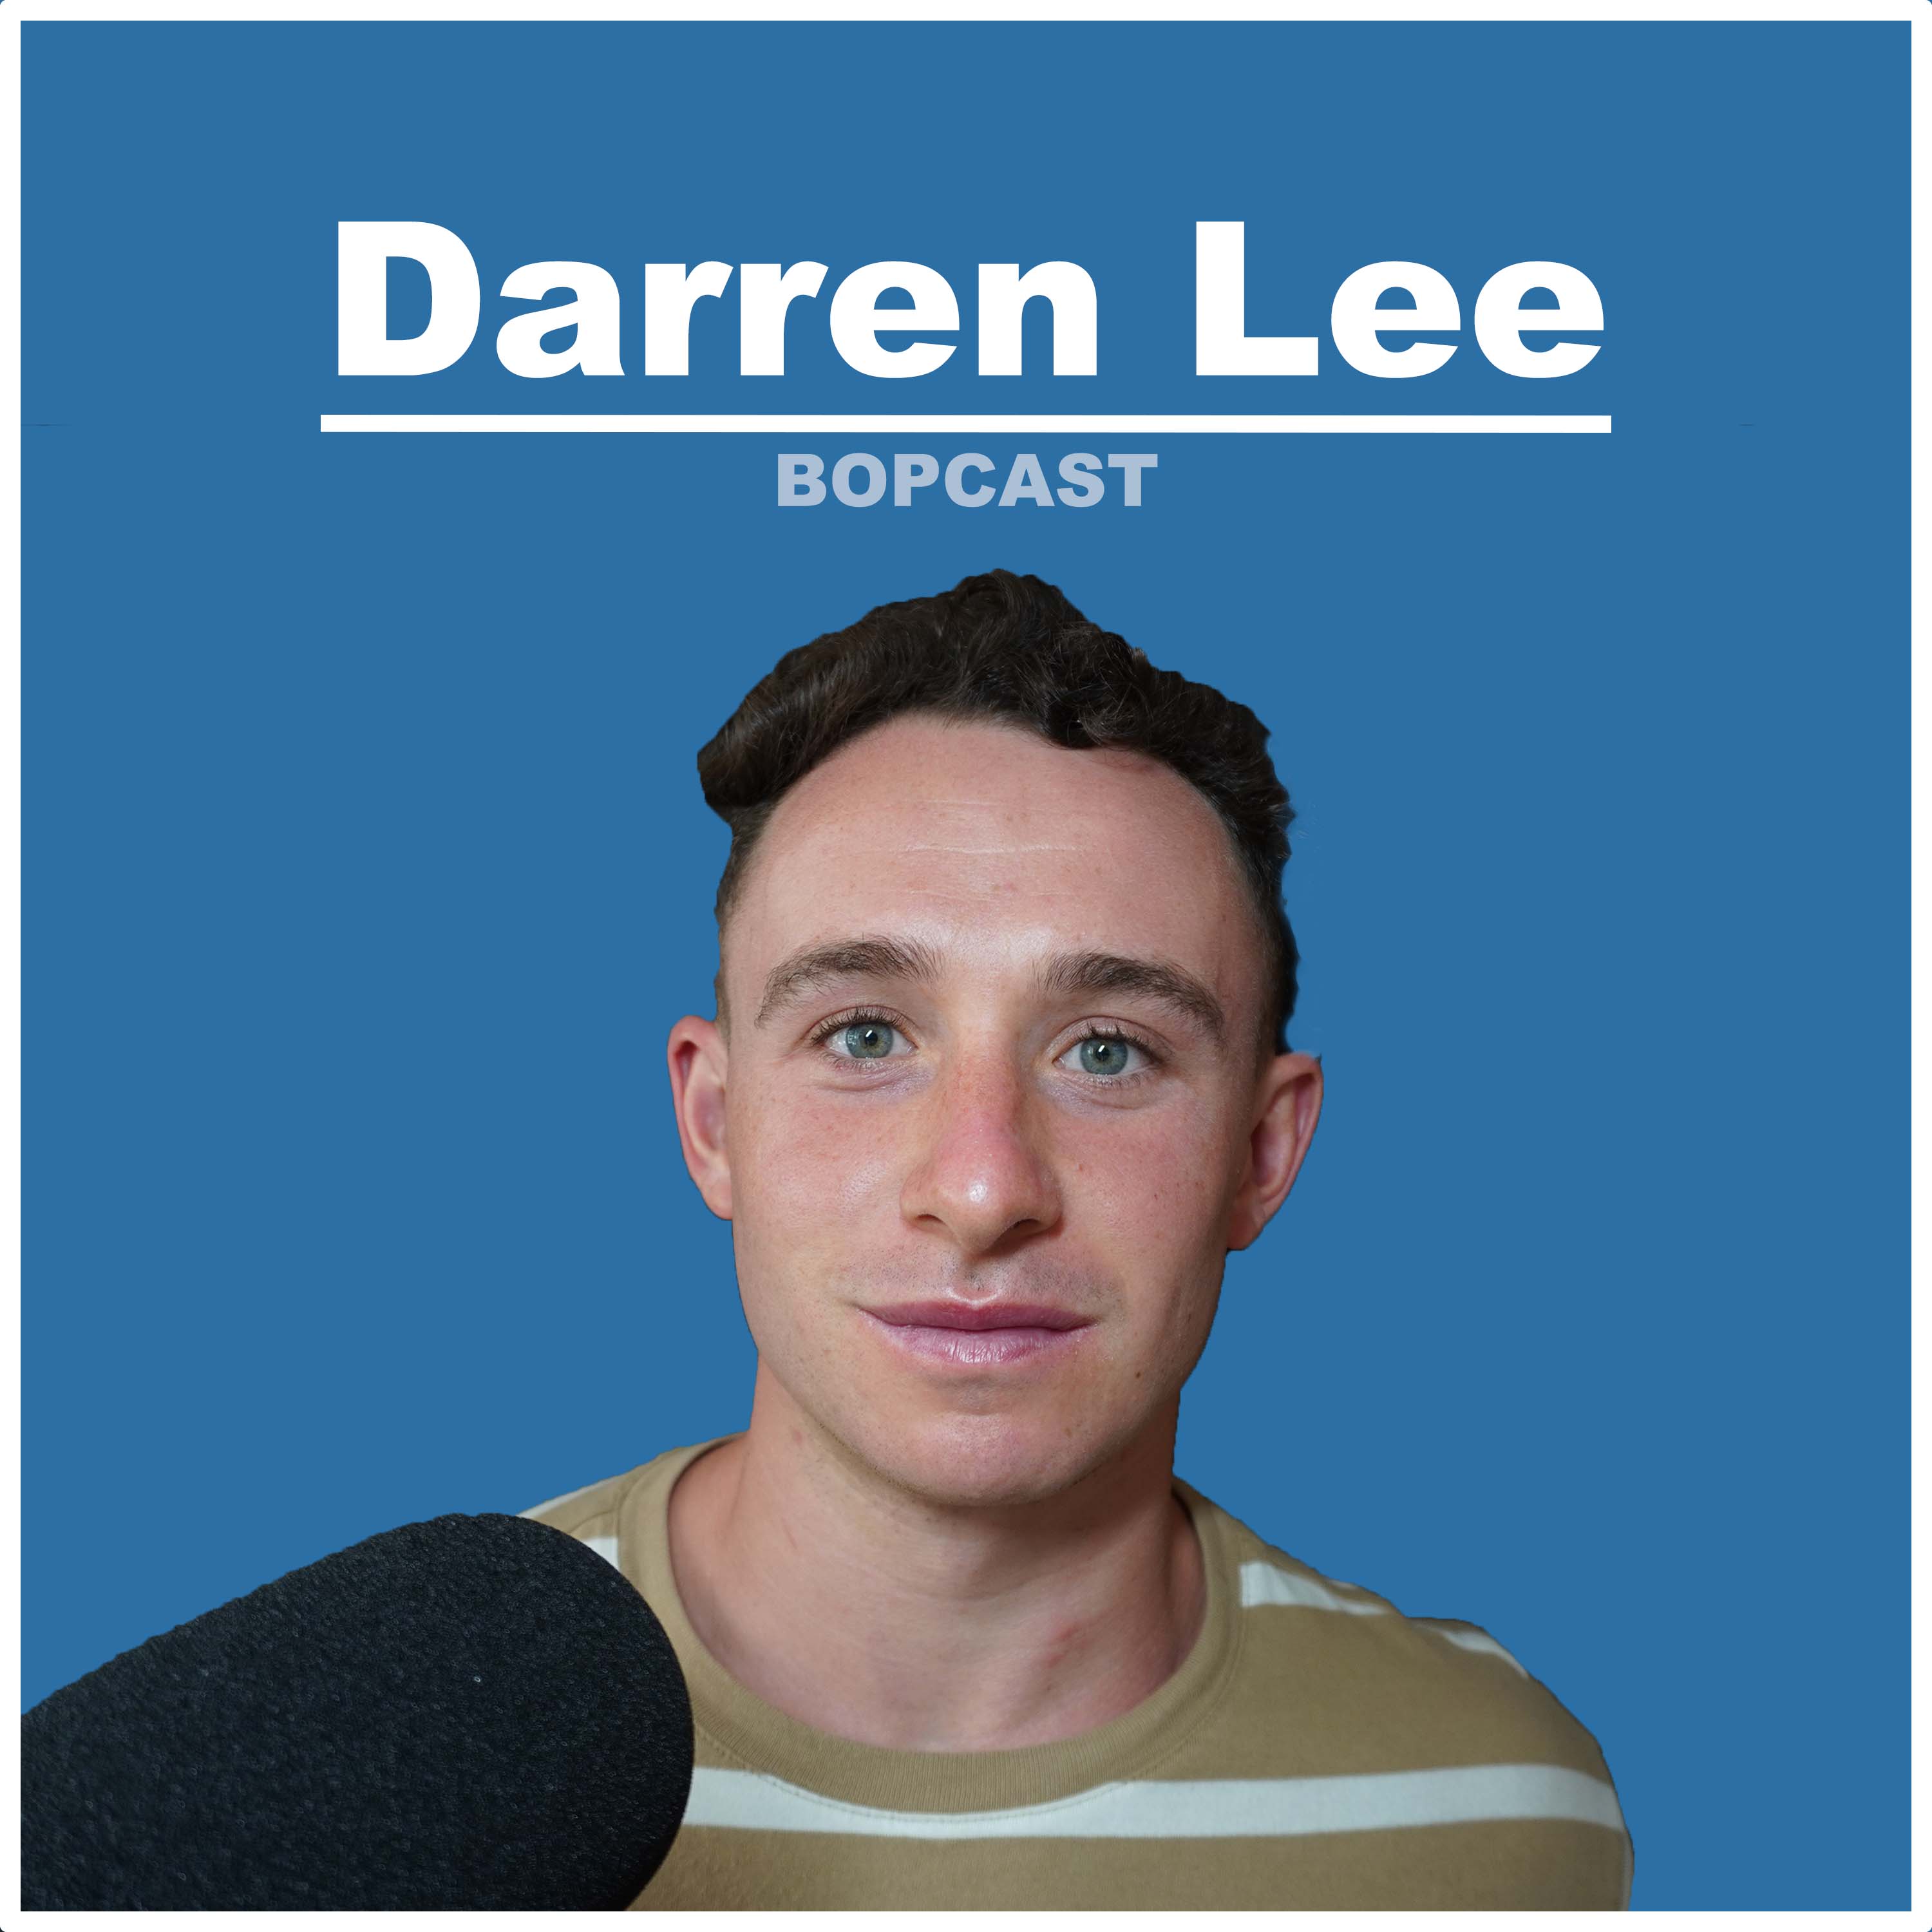 Darren Lee - Irish Bodybuilder on the Pros and Cons of Burnout and Why Your College Habits Followed You